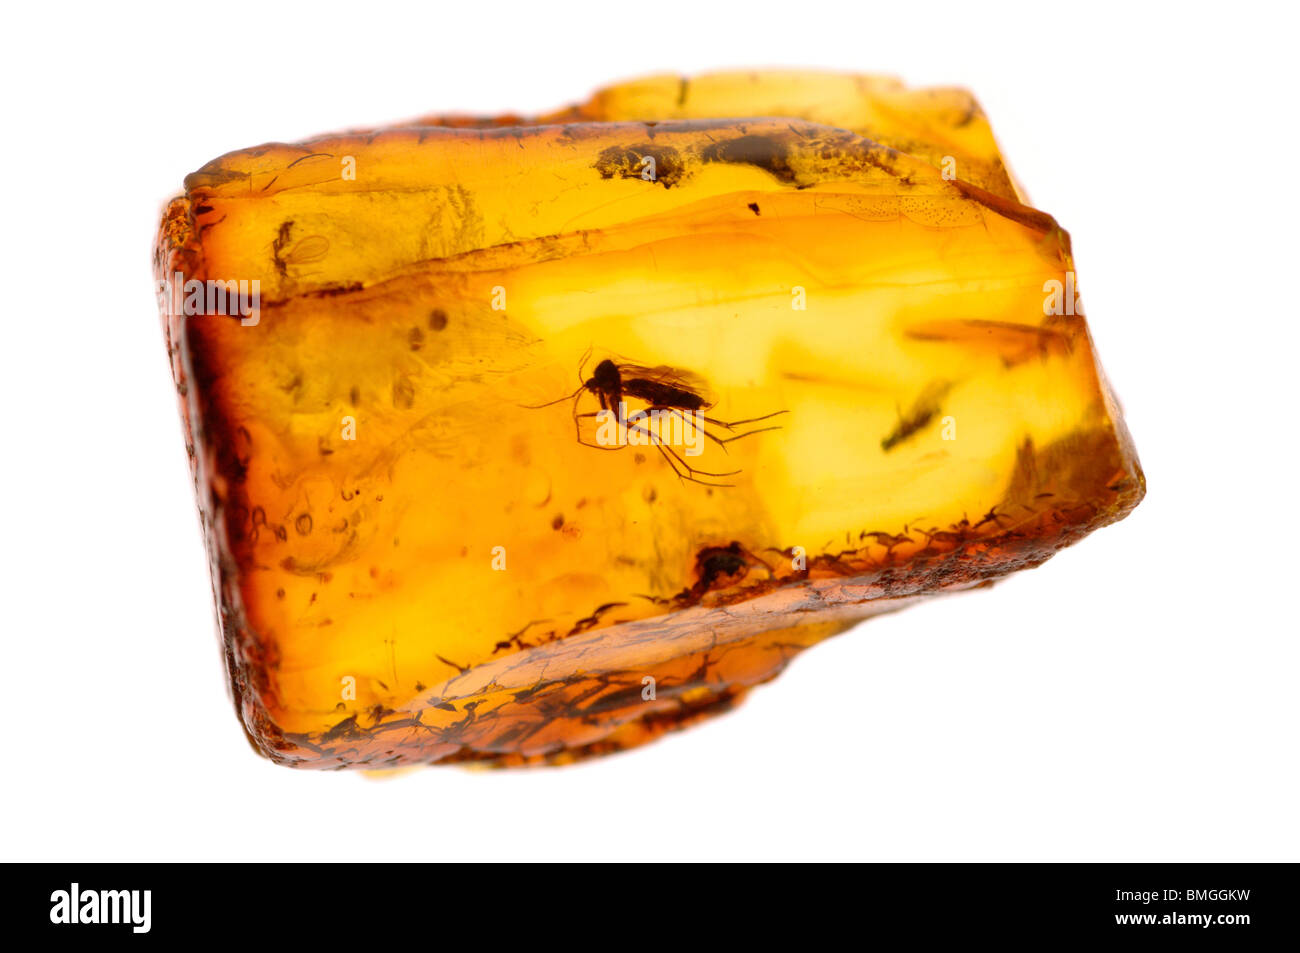 A mosquito type insect in Baltic amber -a fossilized tree resin. Stock Photo